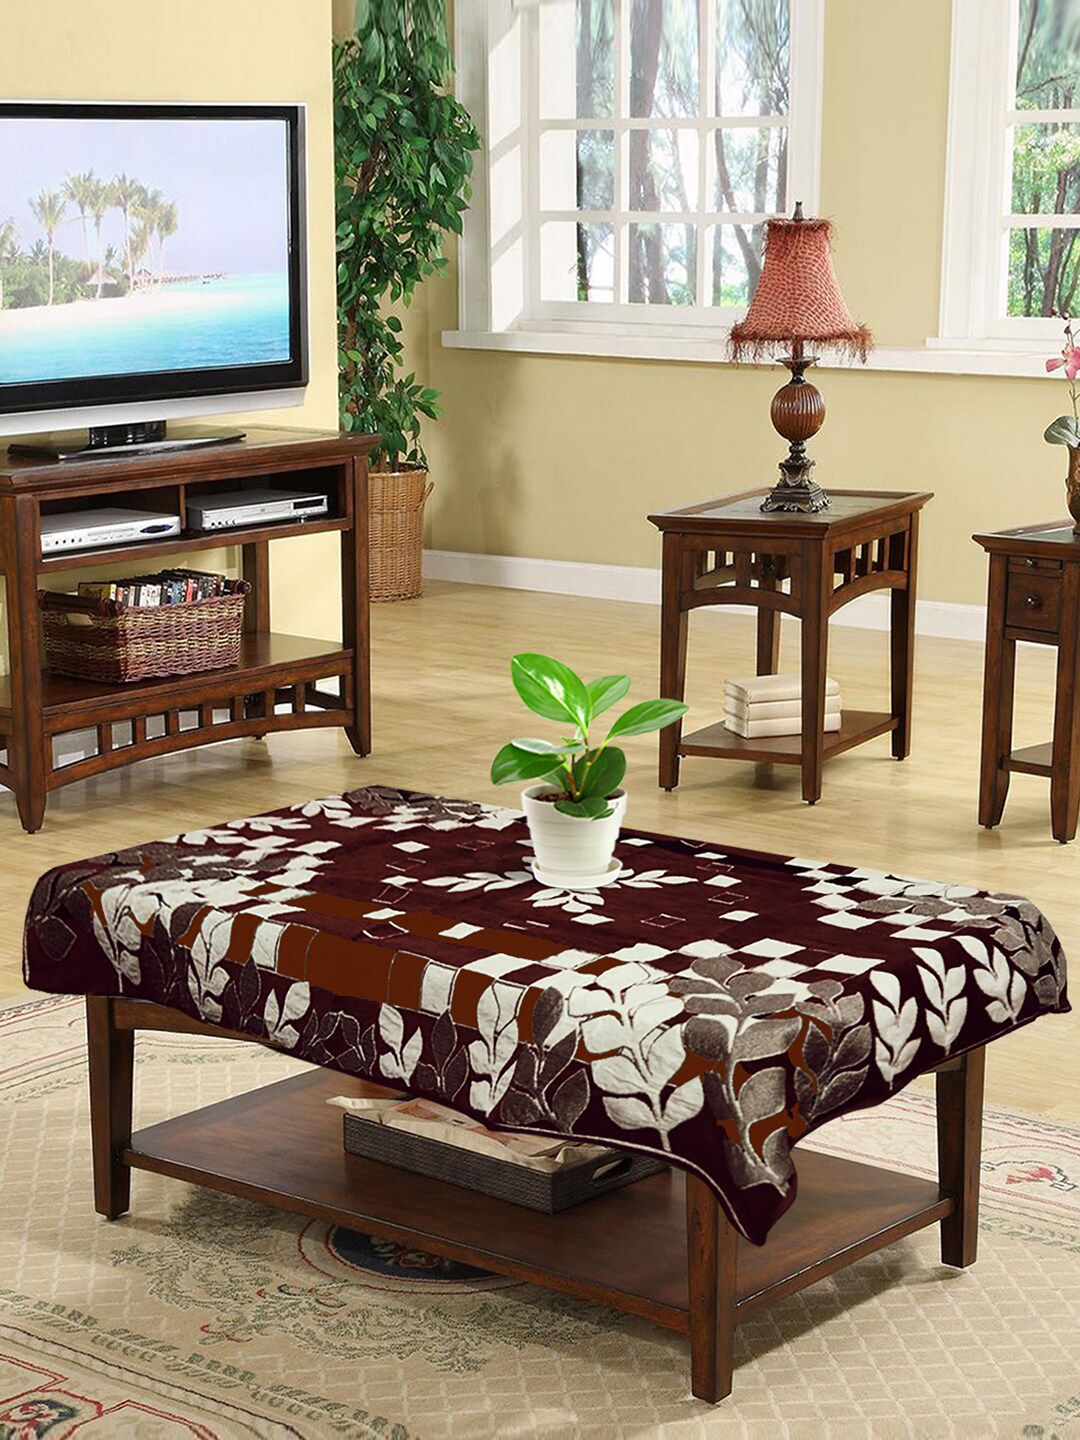 Kuber Industries Brown & White Printed Table Cover Price in India